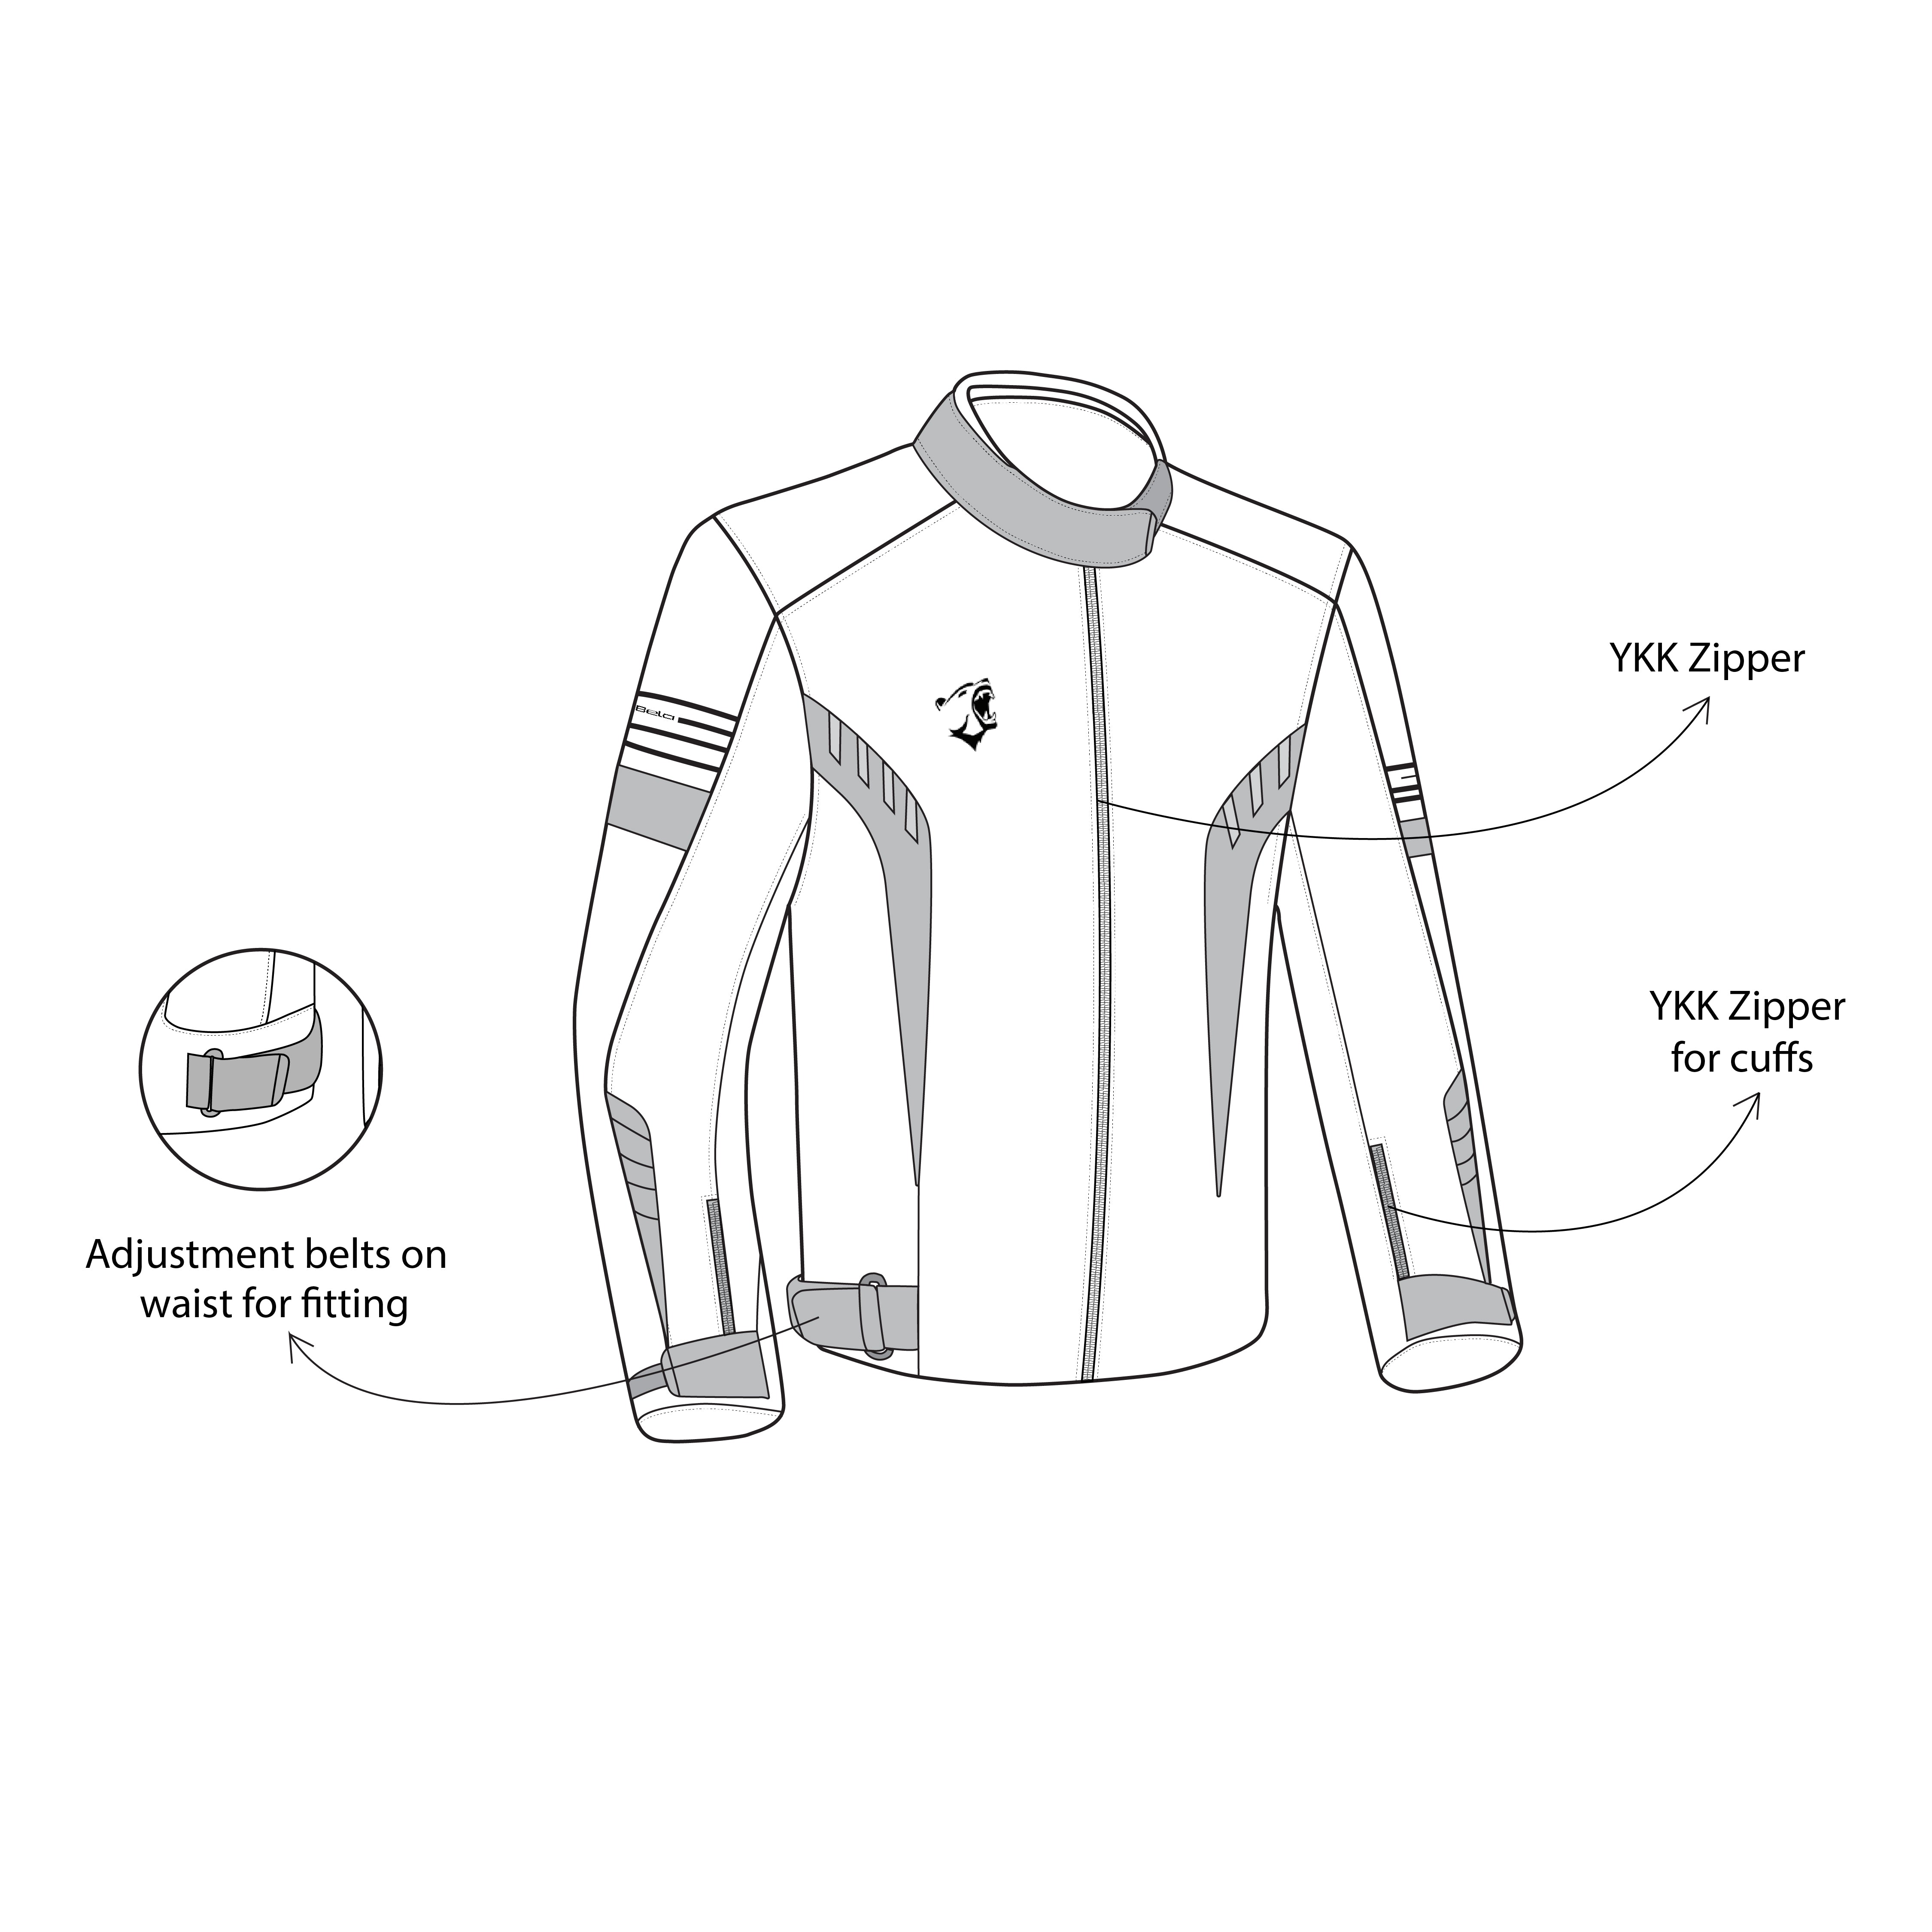 infographic sketch bela bradley textile jacket black and gray top front side view